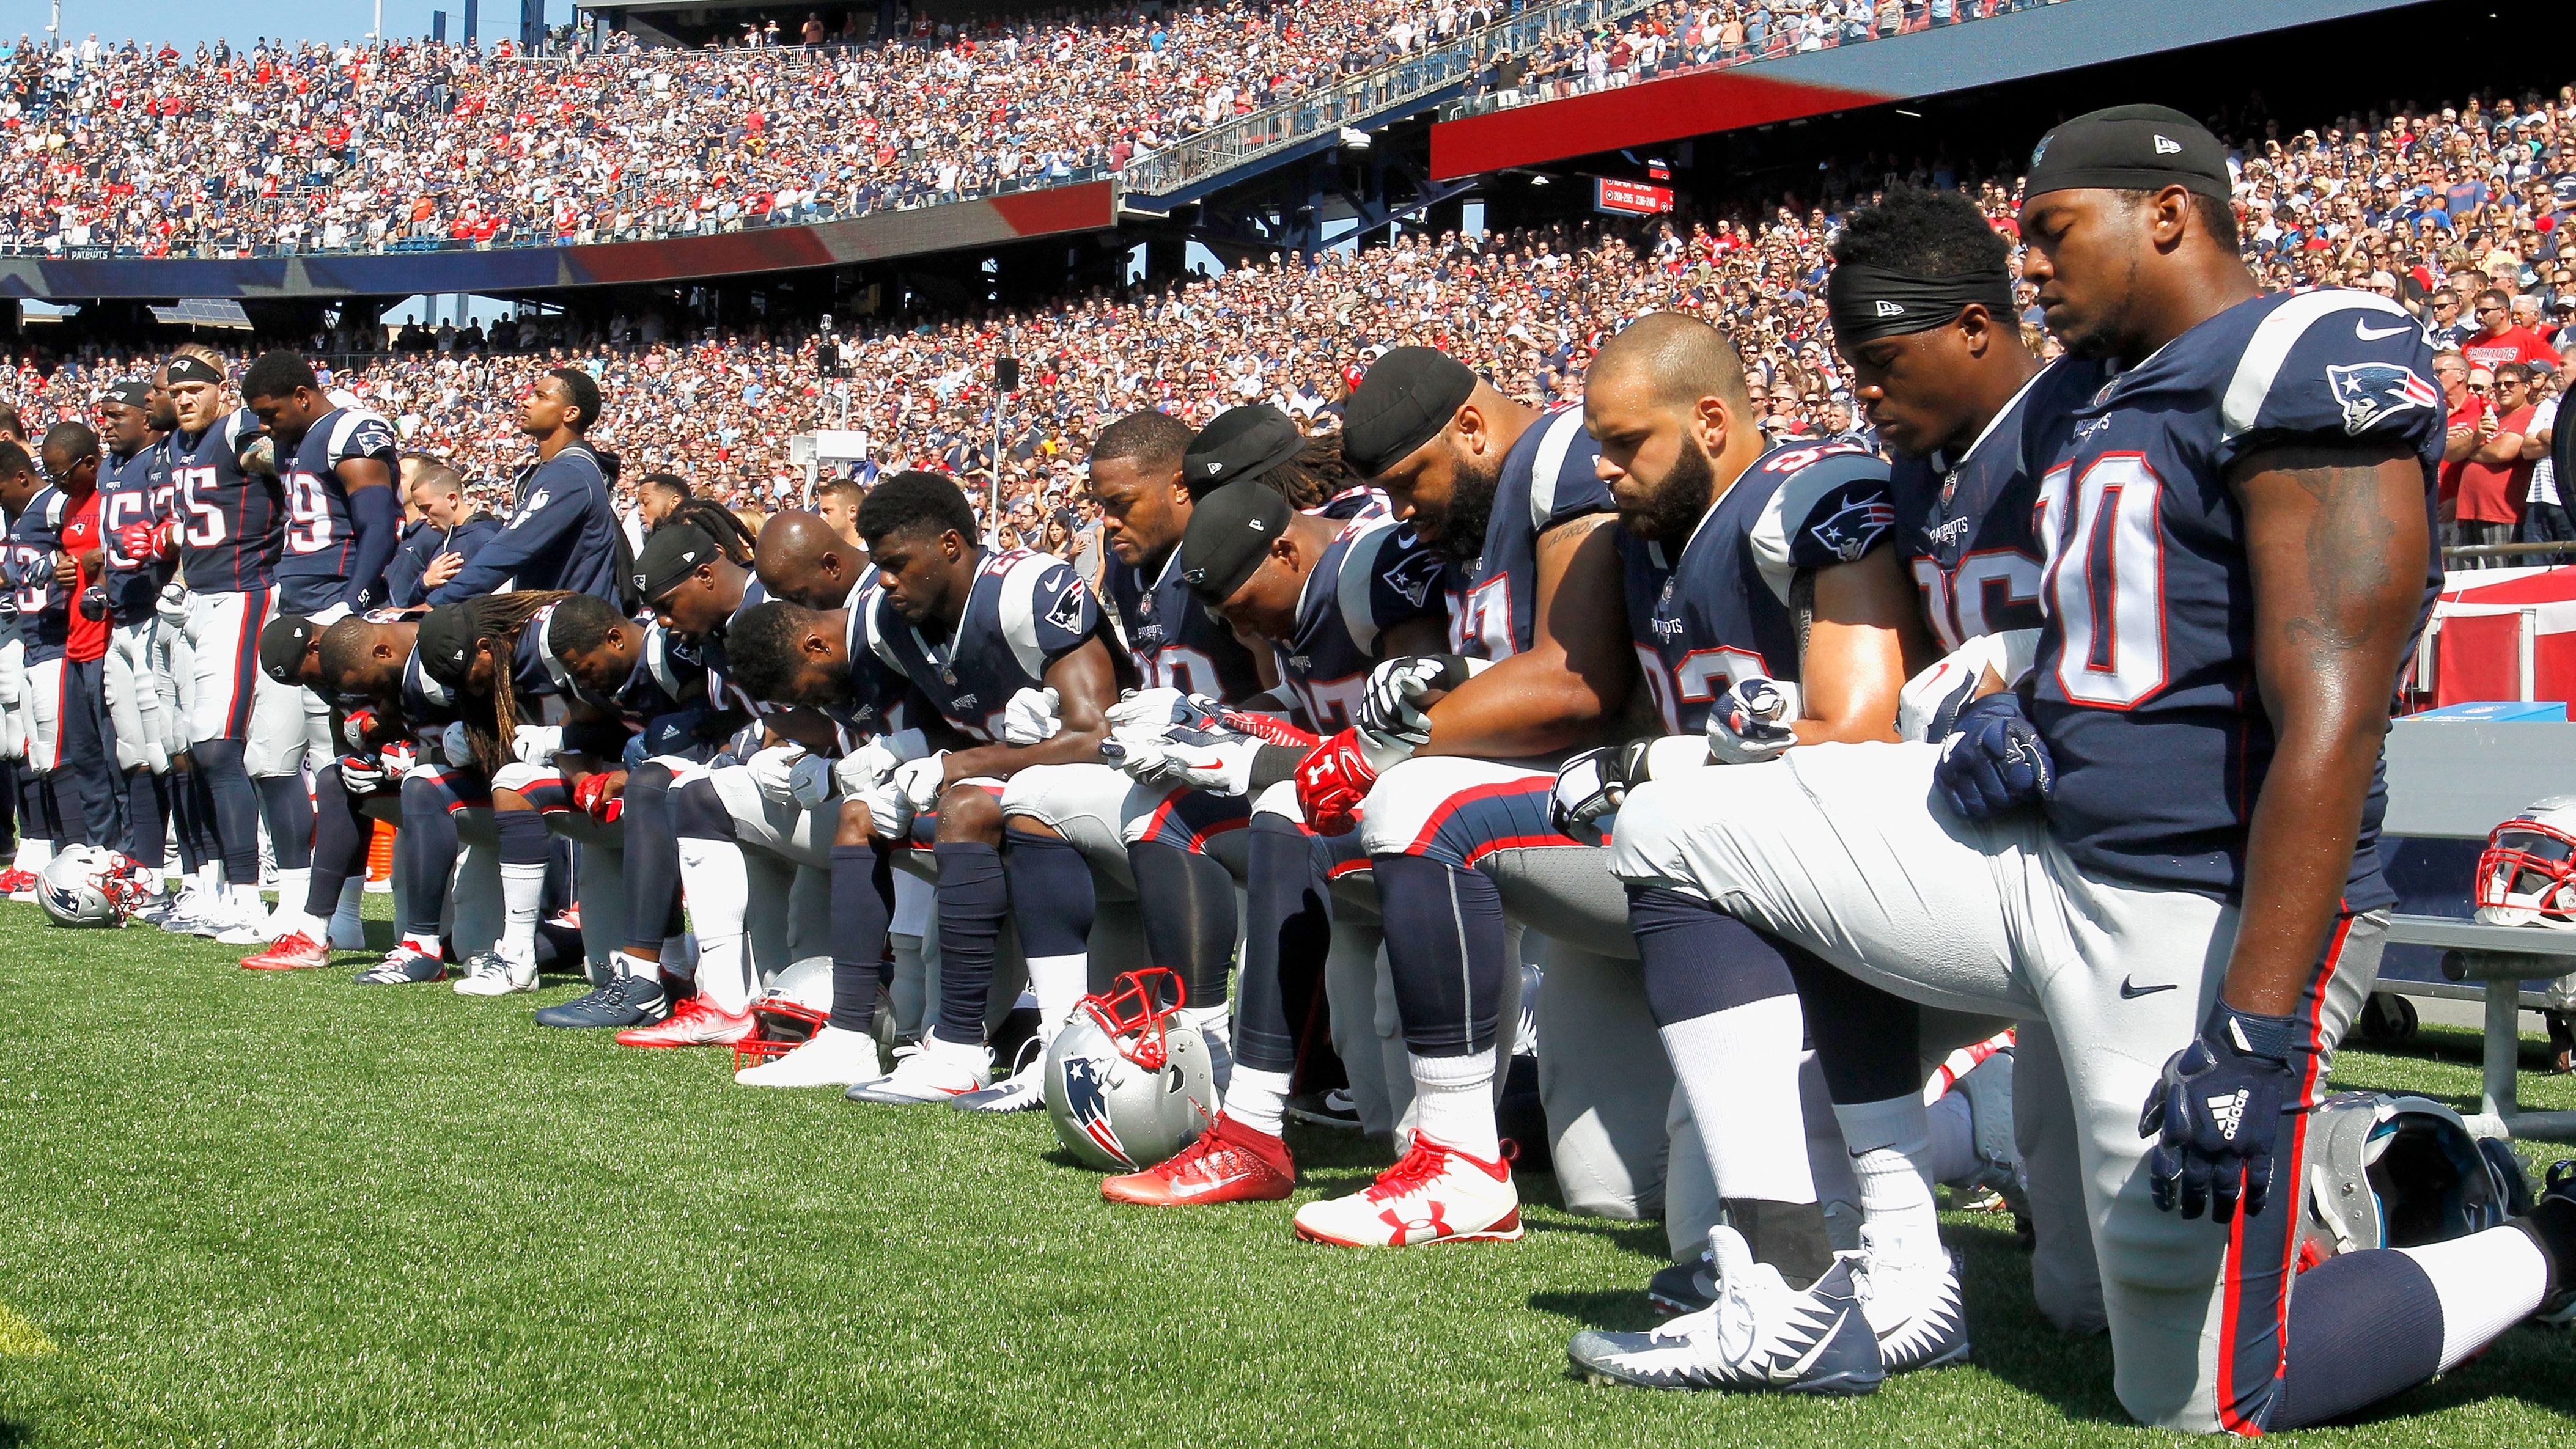 Members of the New England Patriots kneel during the National Anthem before a game. The NFL announced on Thursday it would pledge $250 million over the next ten years to help fight systematic racism.